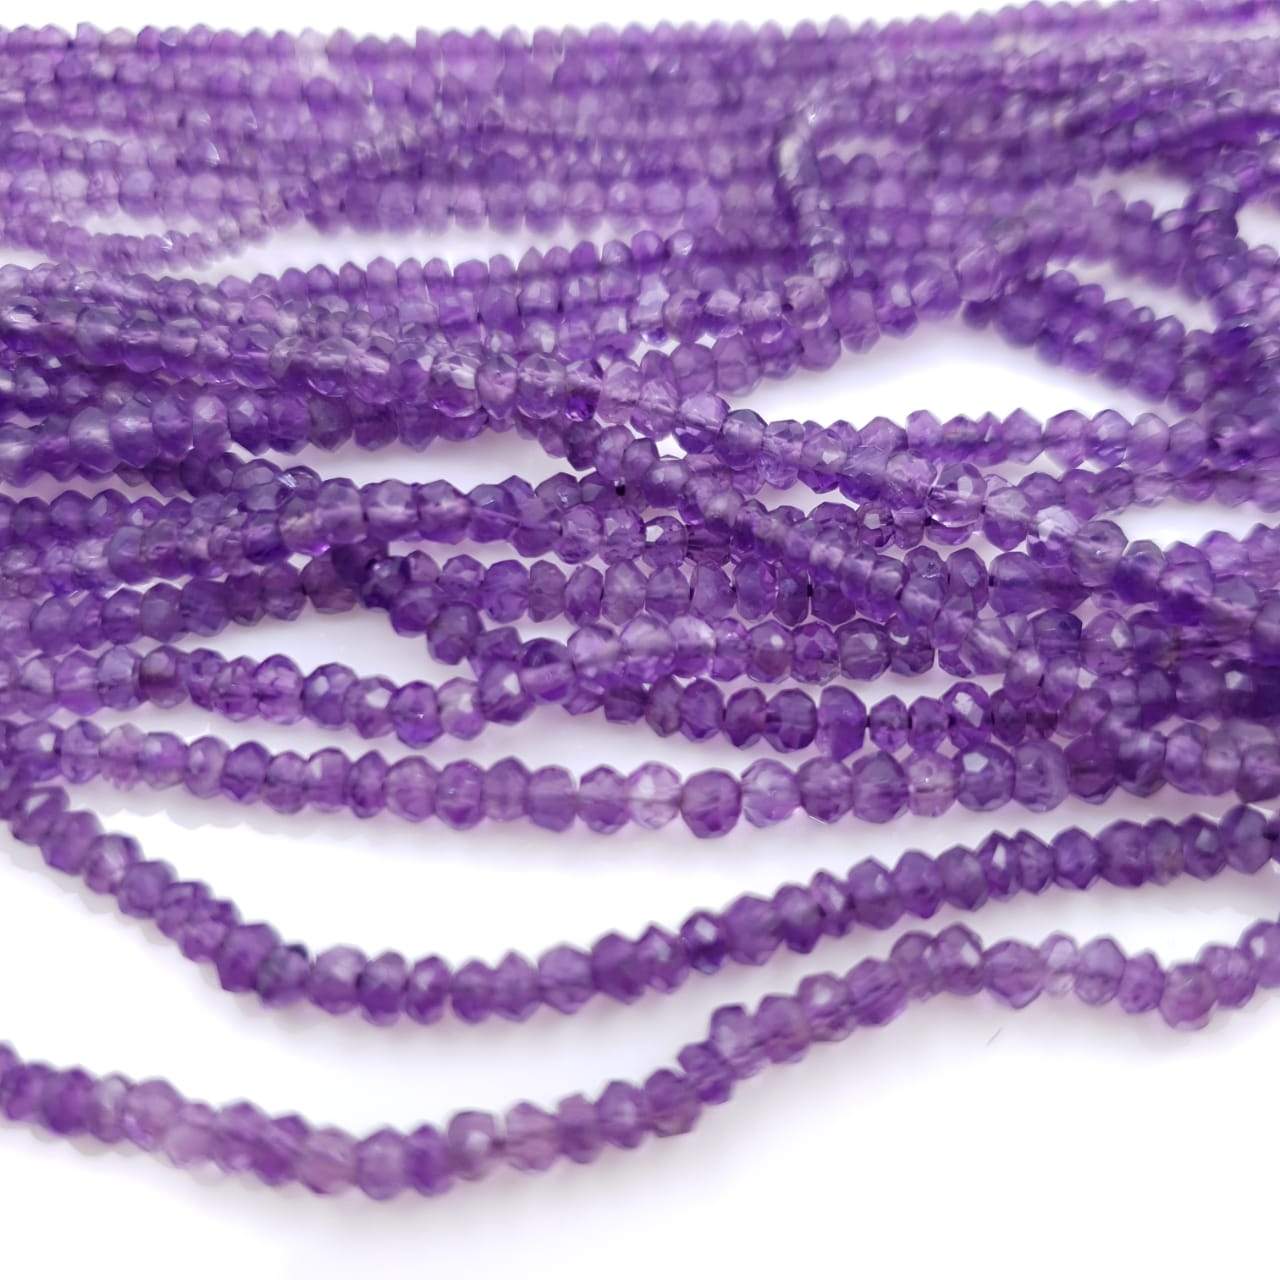 Natural African Amethyst Dark Beads 2mm | Faceted | 14" Inches - The LabradoriteKing